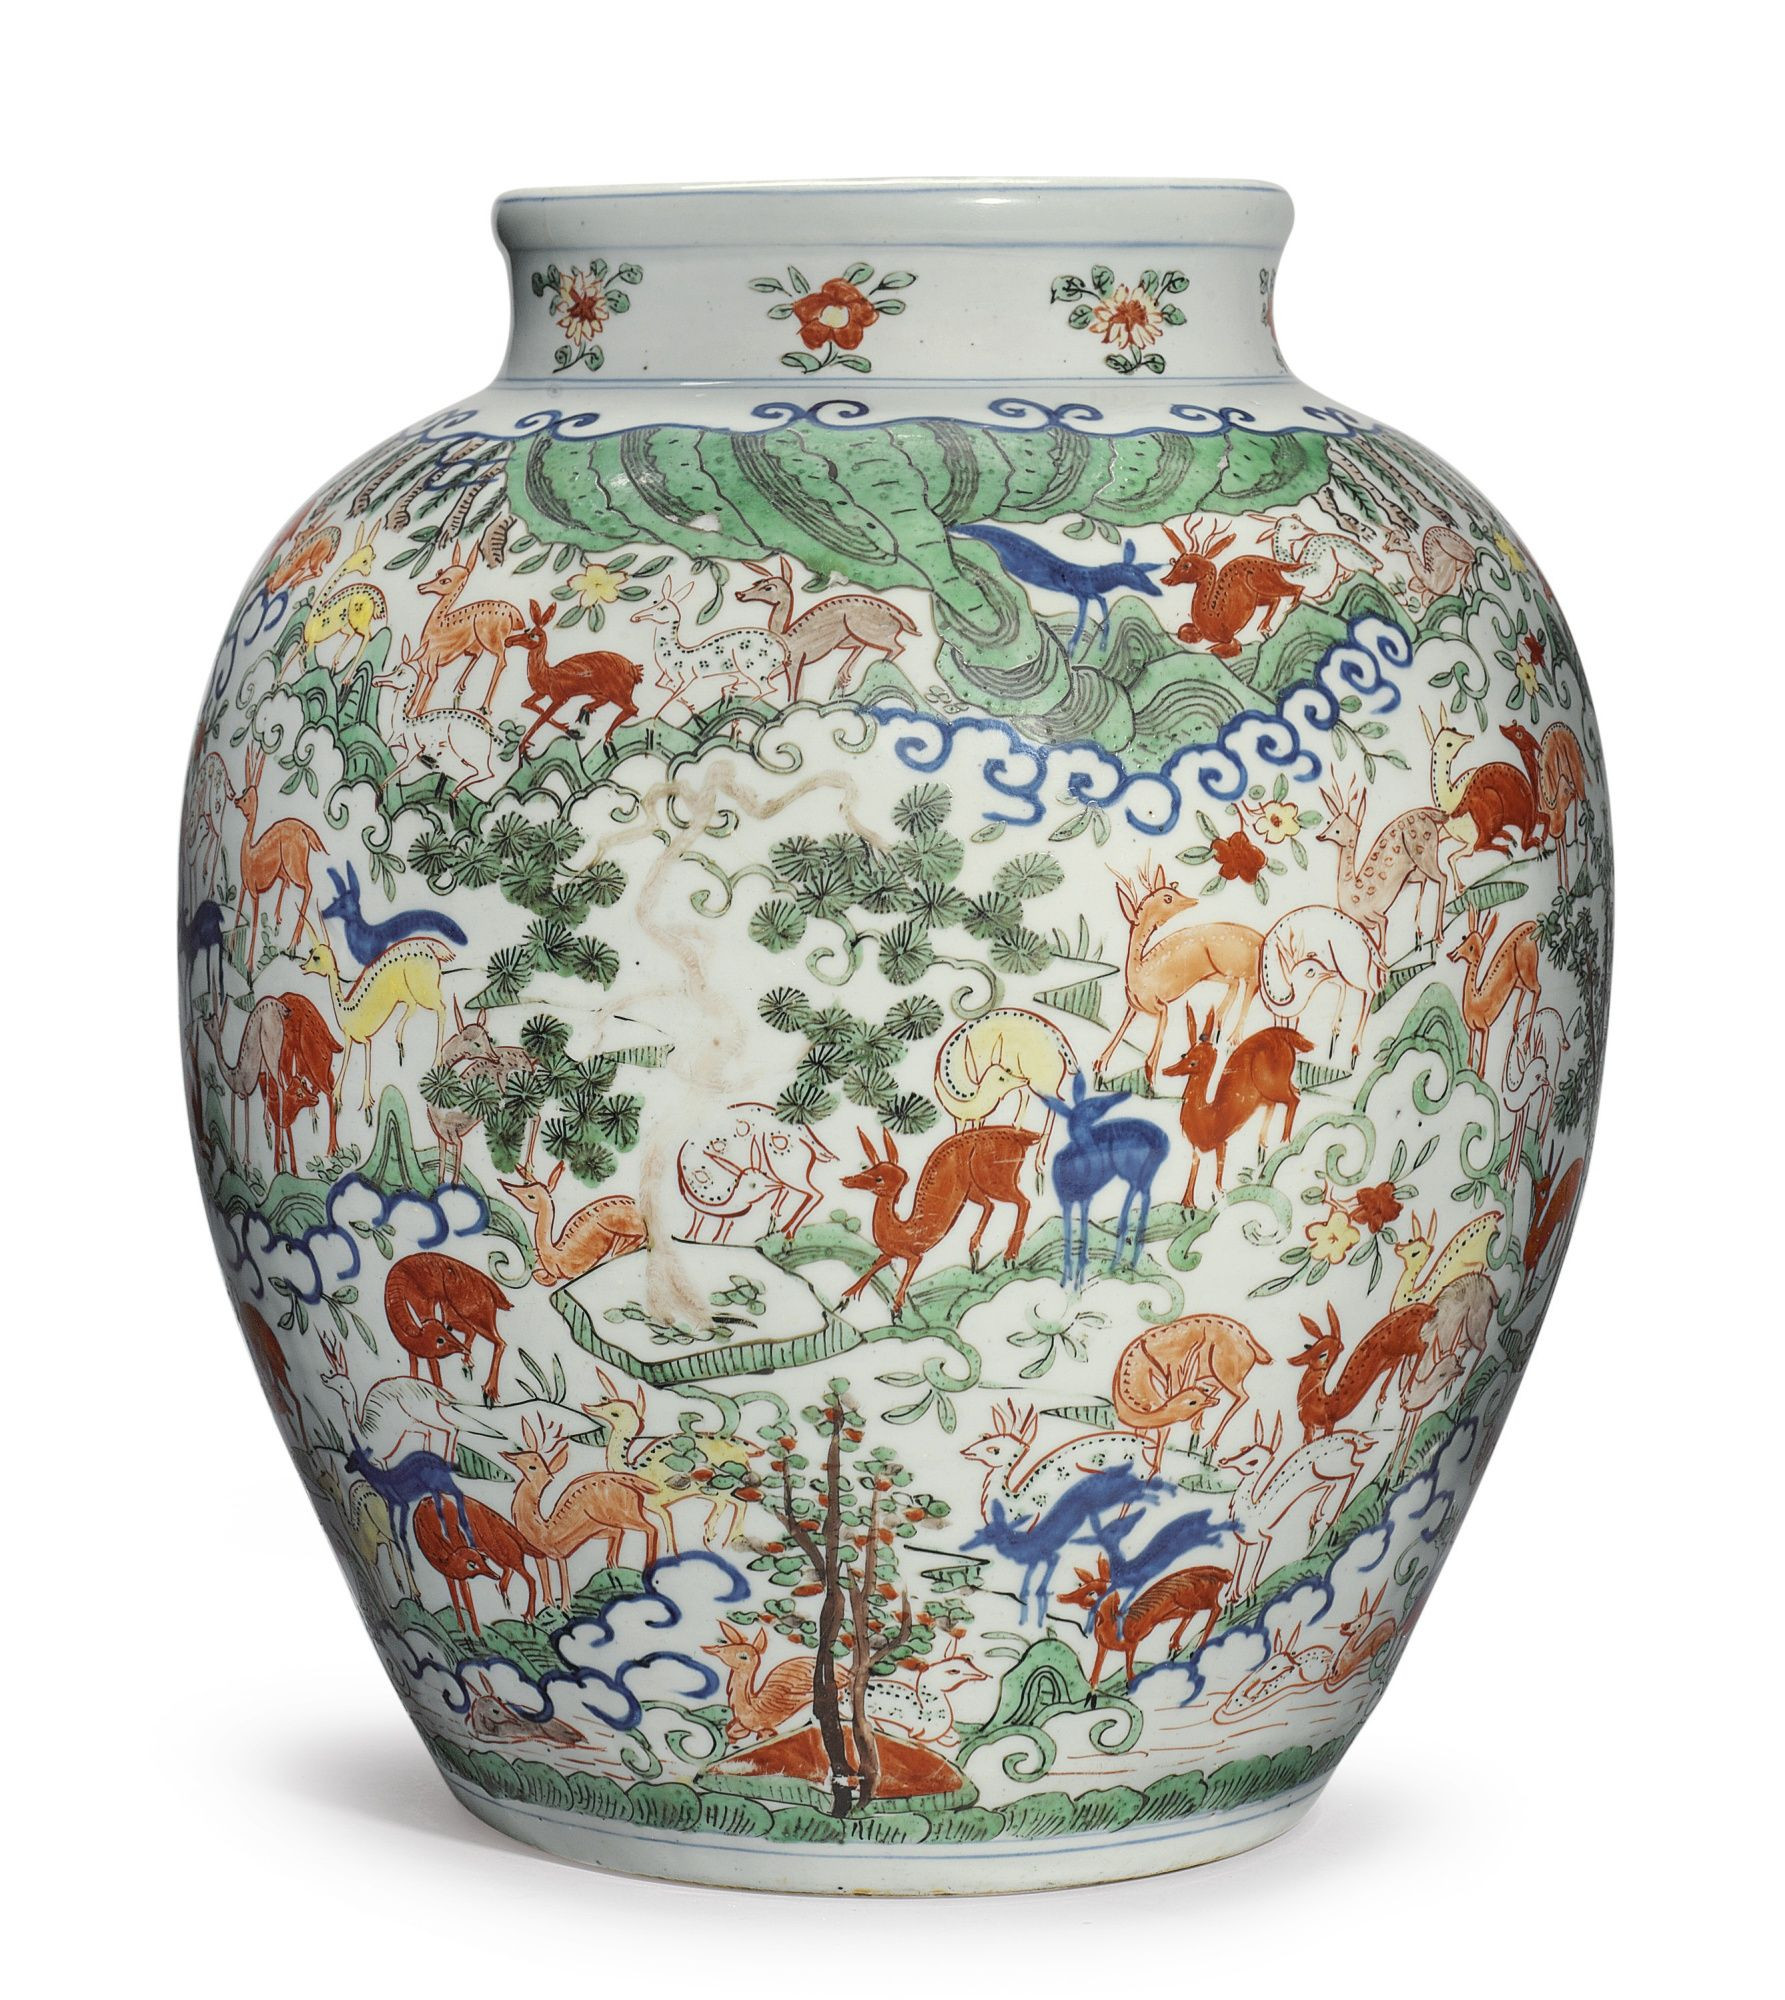 28 Fashionable Large Chinese Vase 2024 free download large chinese vase of a large and important wucai hundred deer vase wanli mark and within a large and important wucai hundred deer vase wanli mark and period 1573 1619